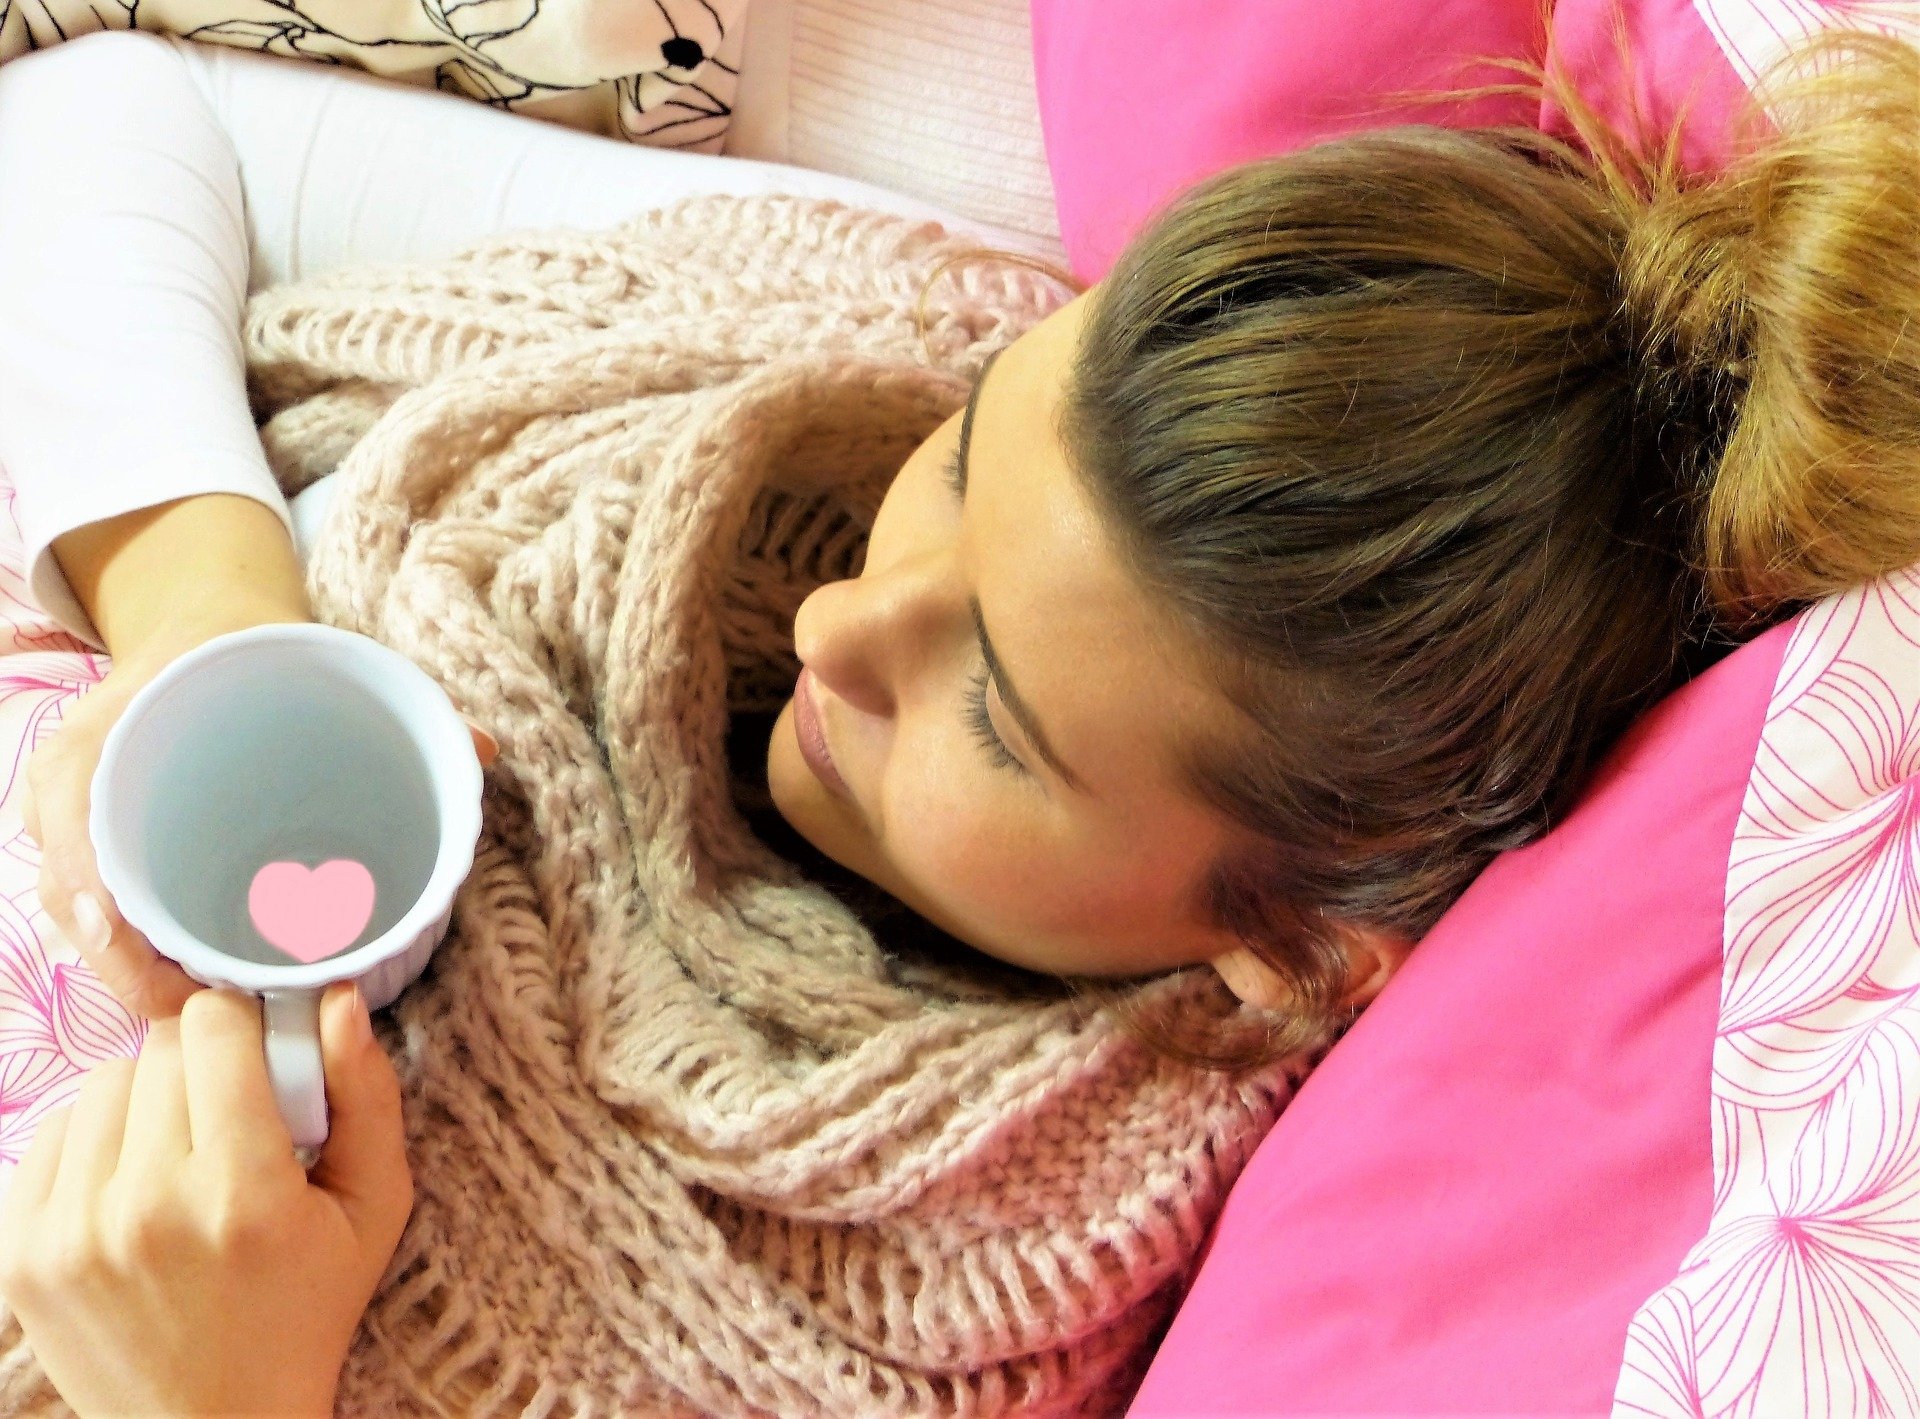 LearnOnline Safeguarding Woman sat against pink pillow with cup that has pink heart floating in it